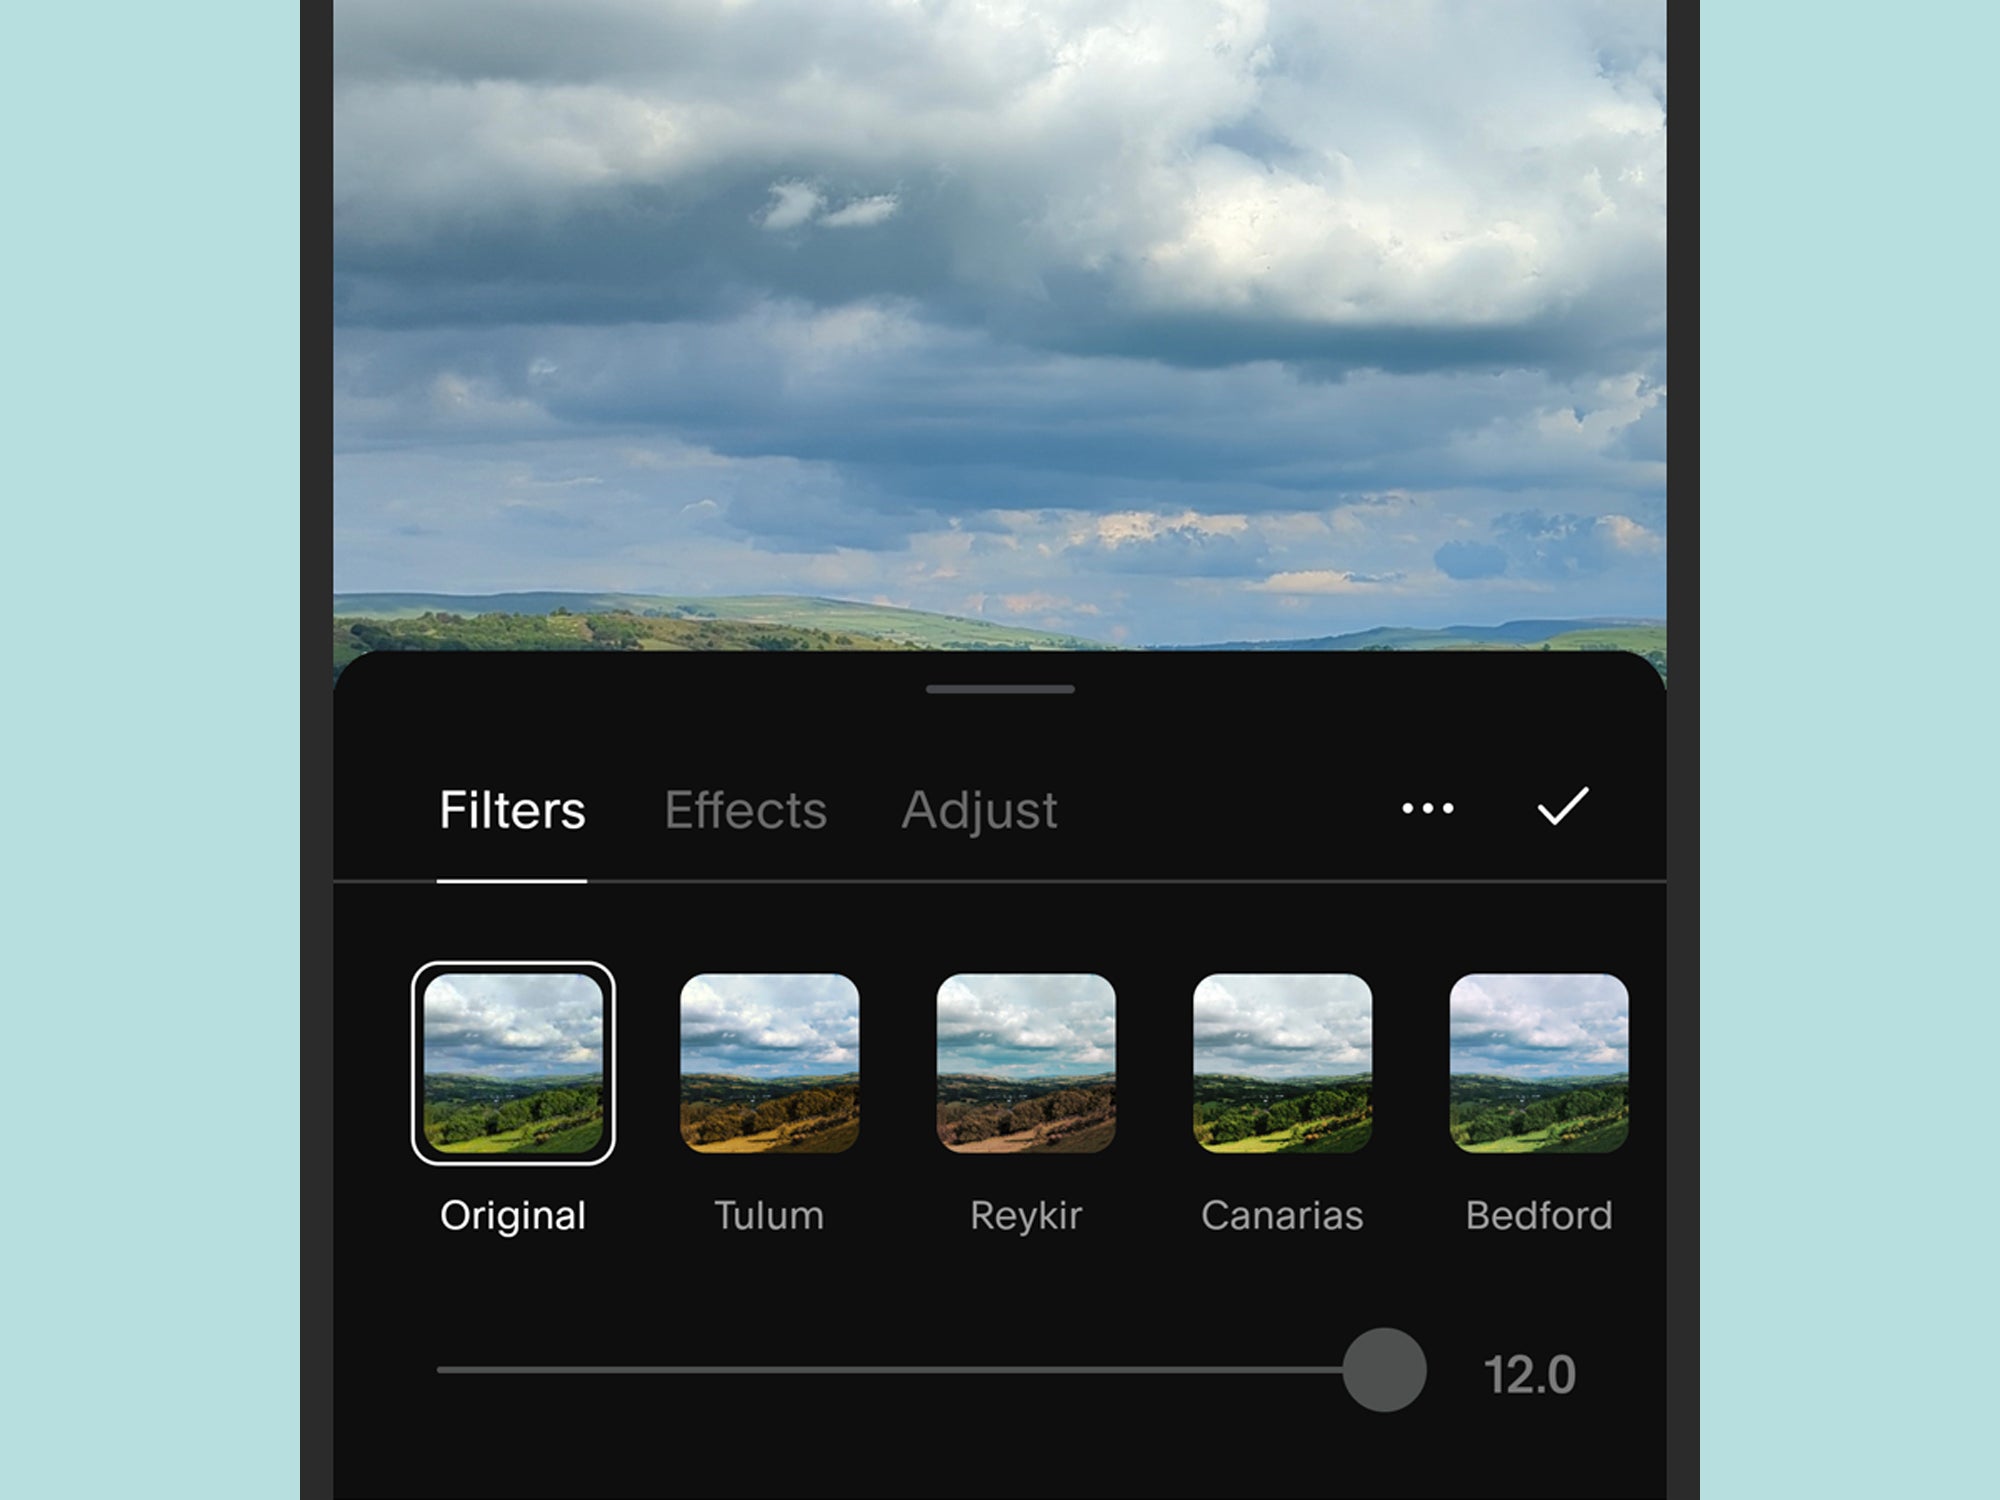 The interface for creating collages on Instagram in the Unfold app.